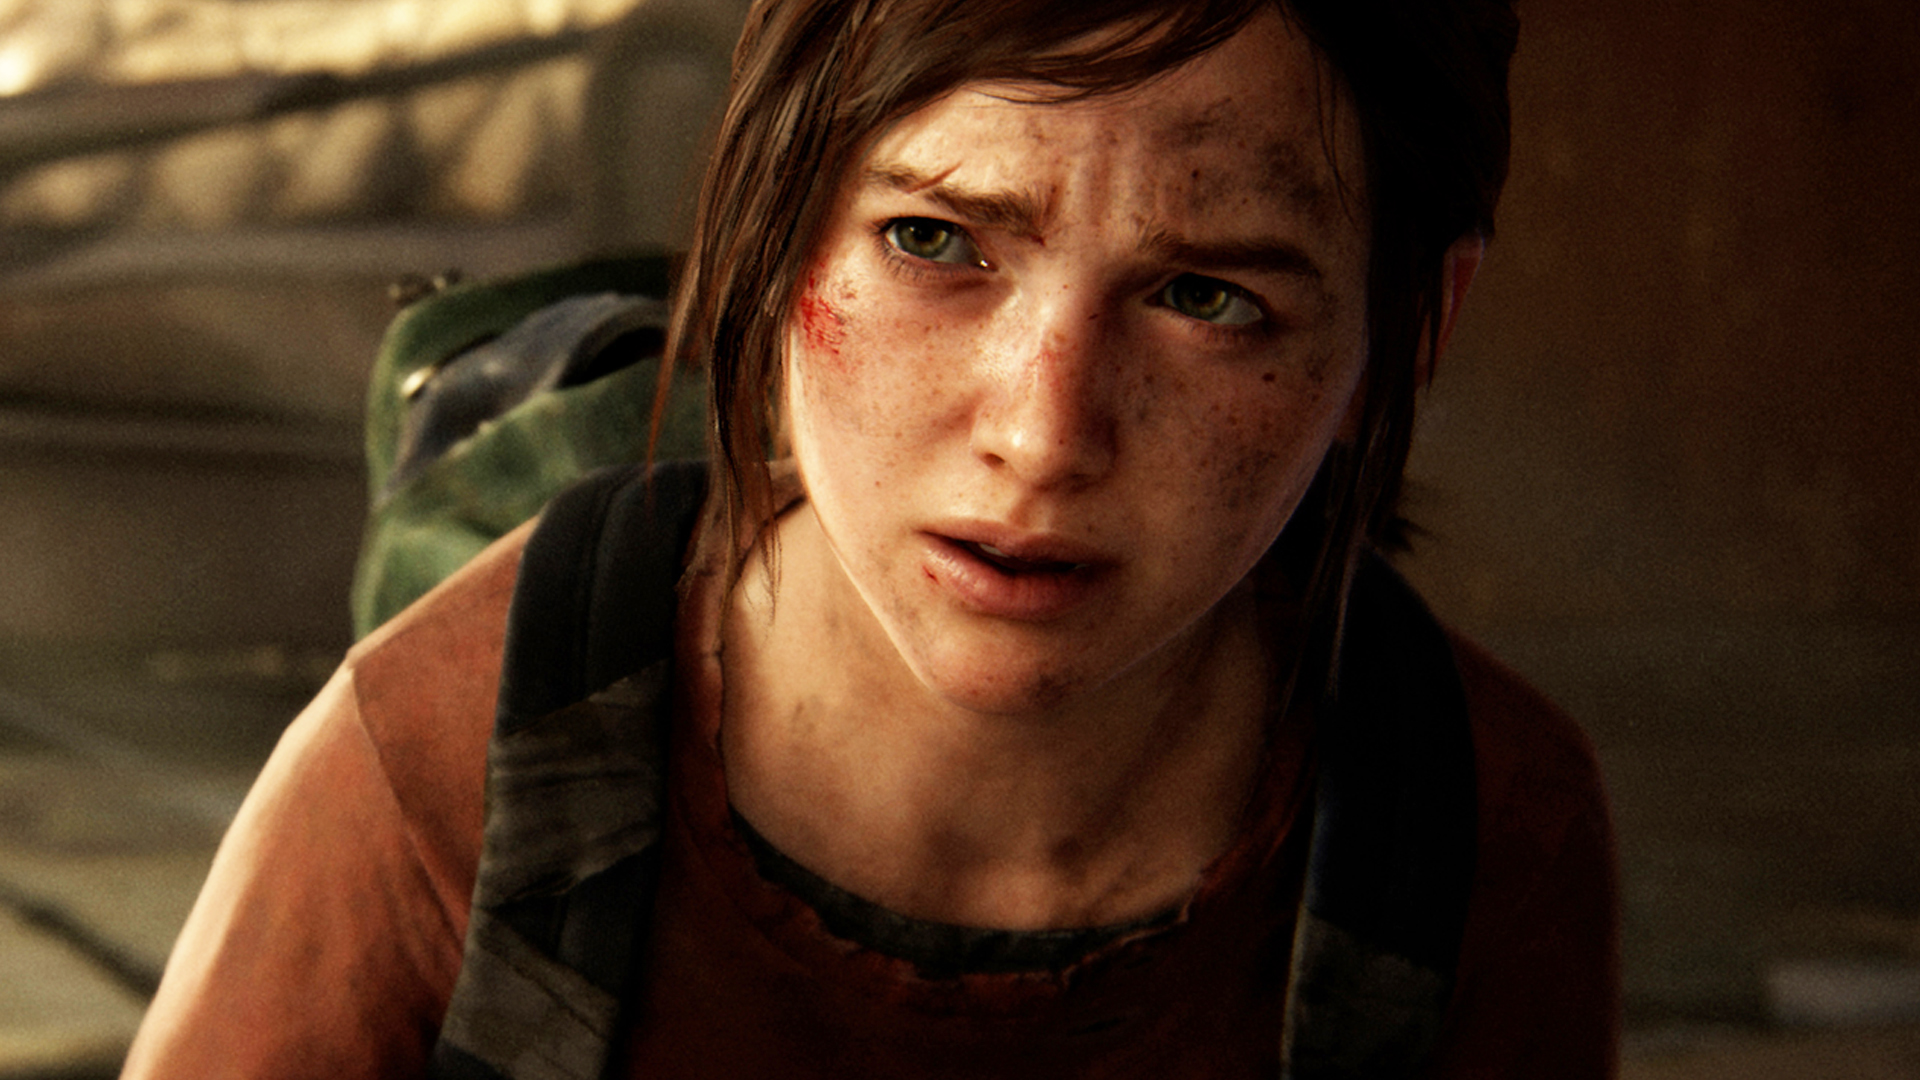 The Last of Us Part 1 on PC – 15 Details You Need To Know